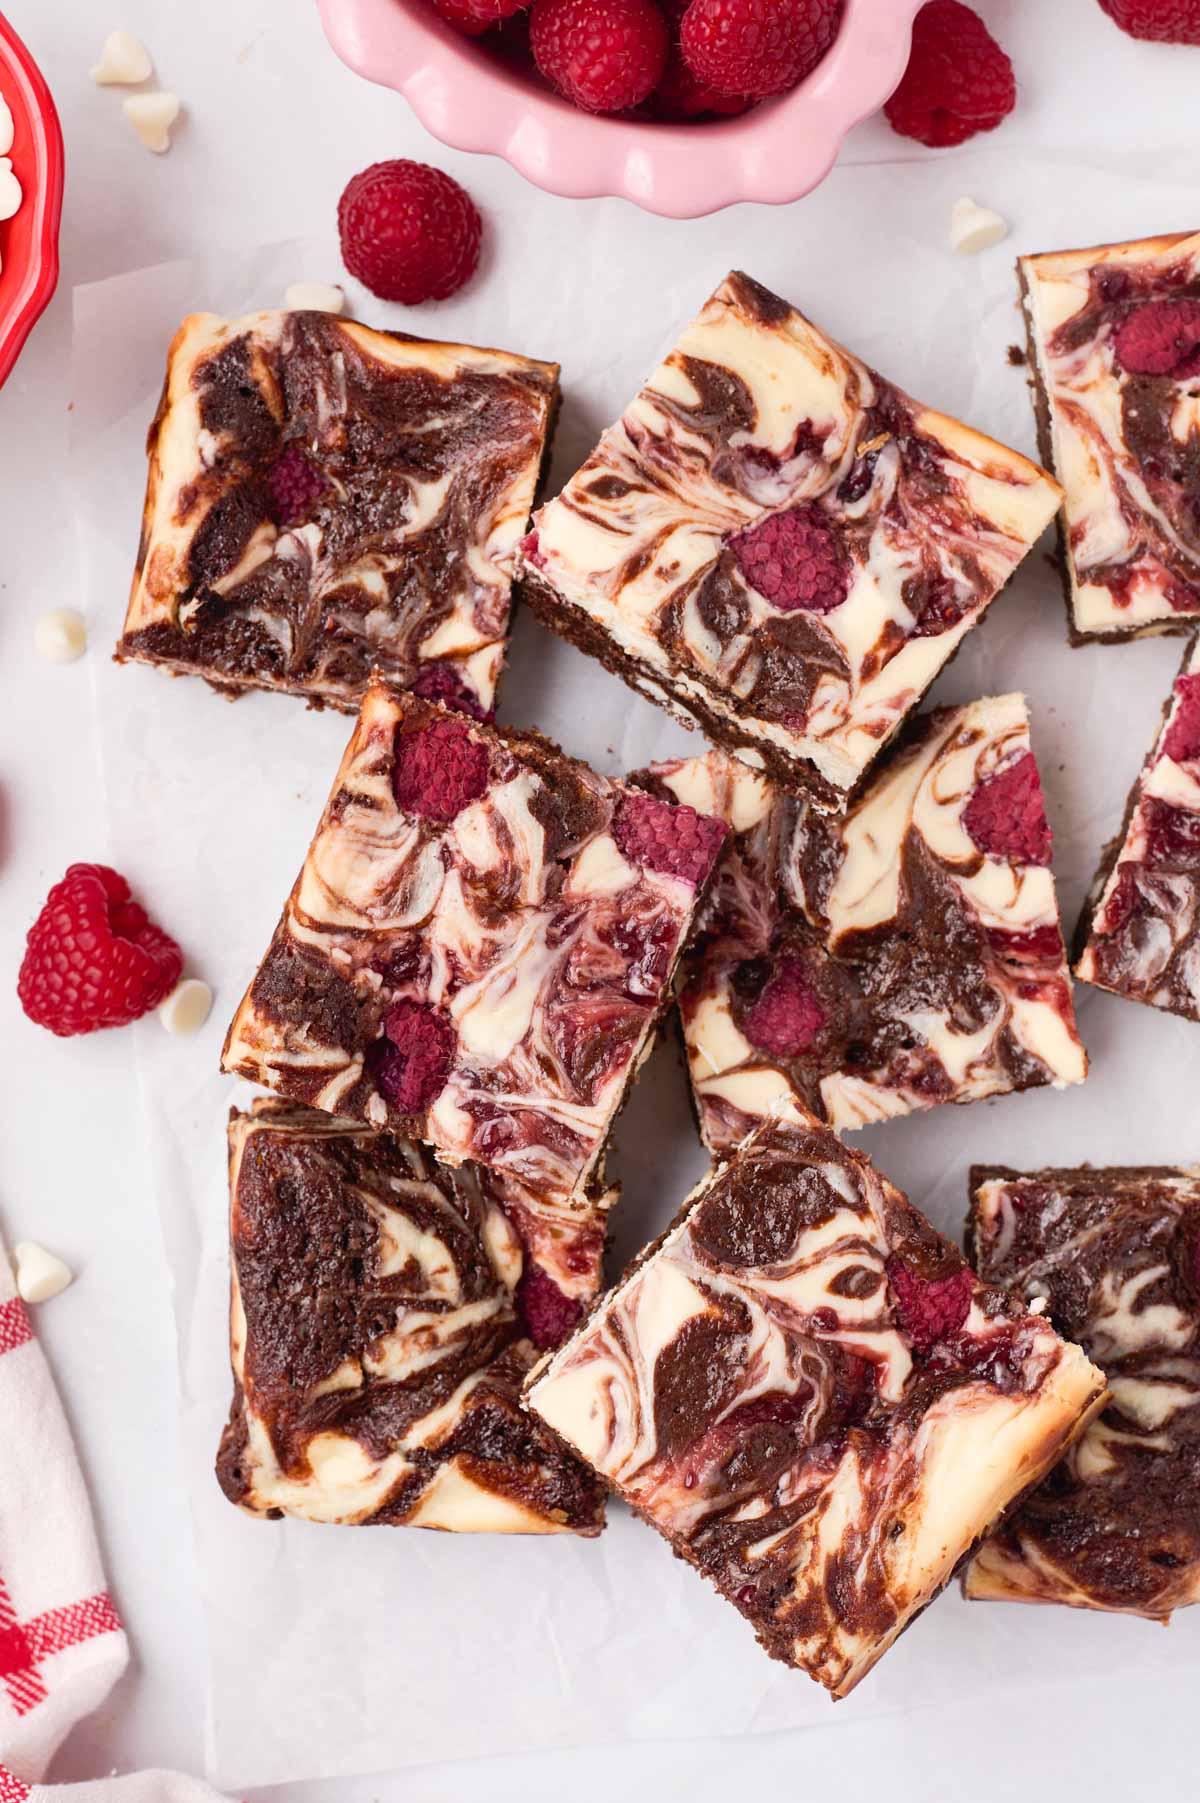 Raspberry cheesecake brownies on parchment paper with fresh raspberries and white chocolate chips